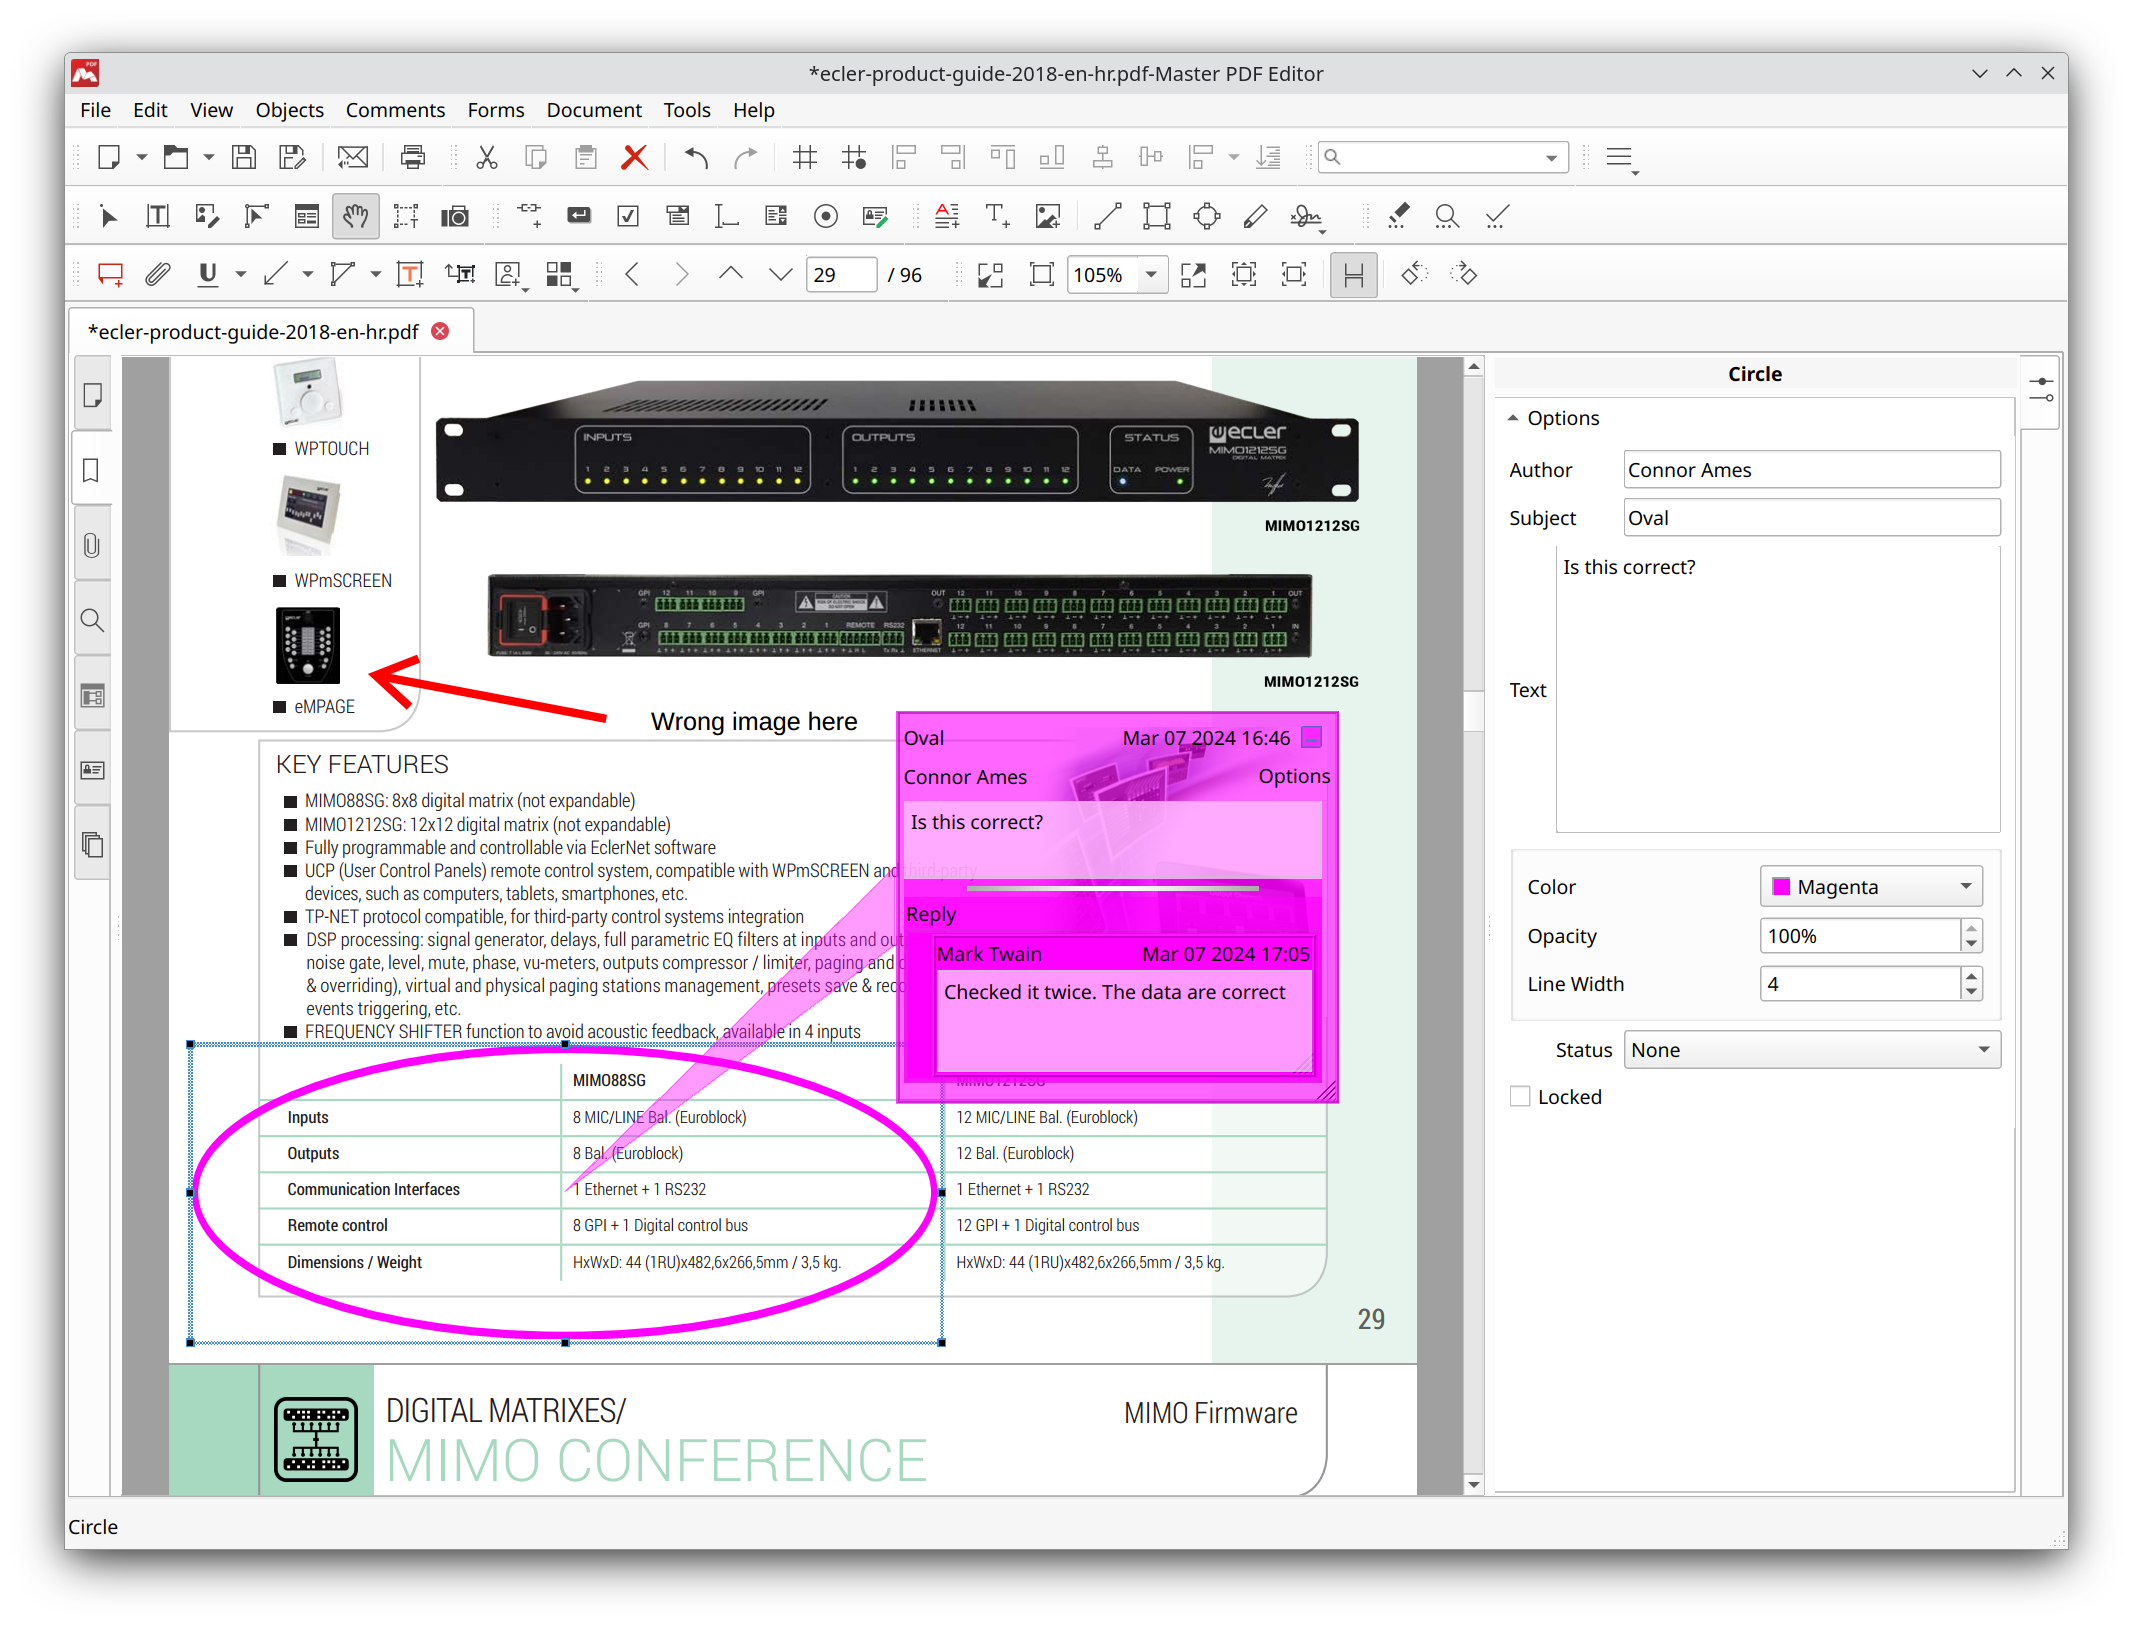 Commenting of the drawing tool in Master PDF Editor 